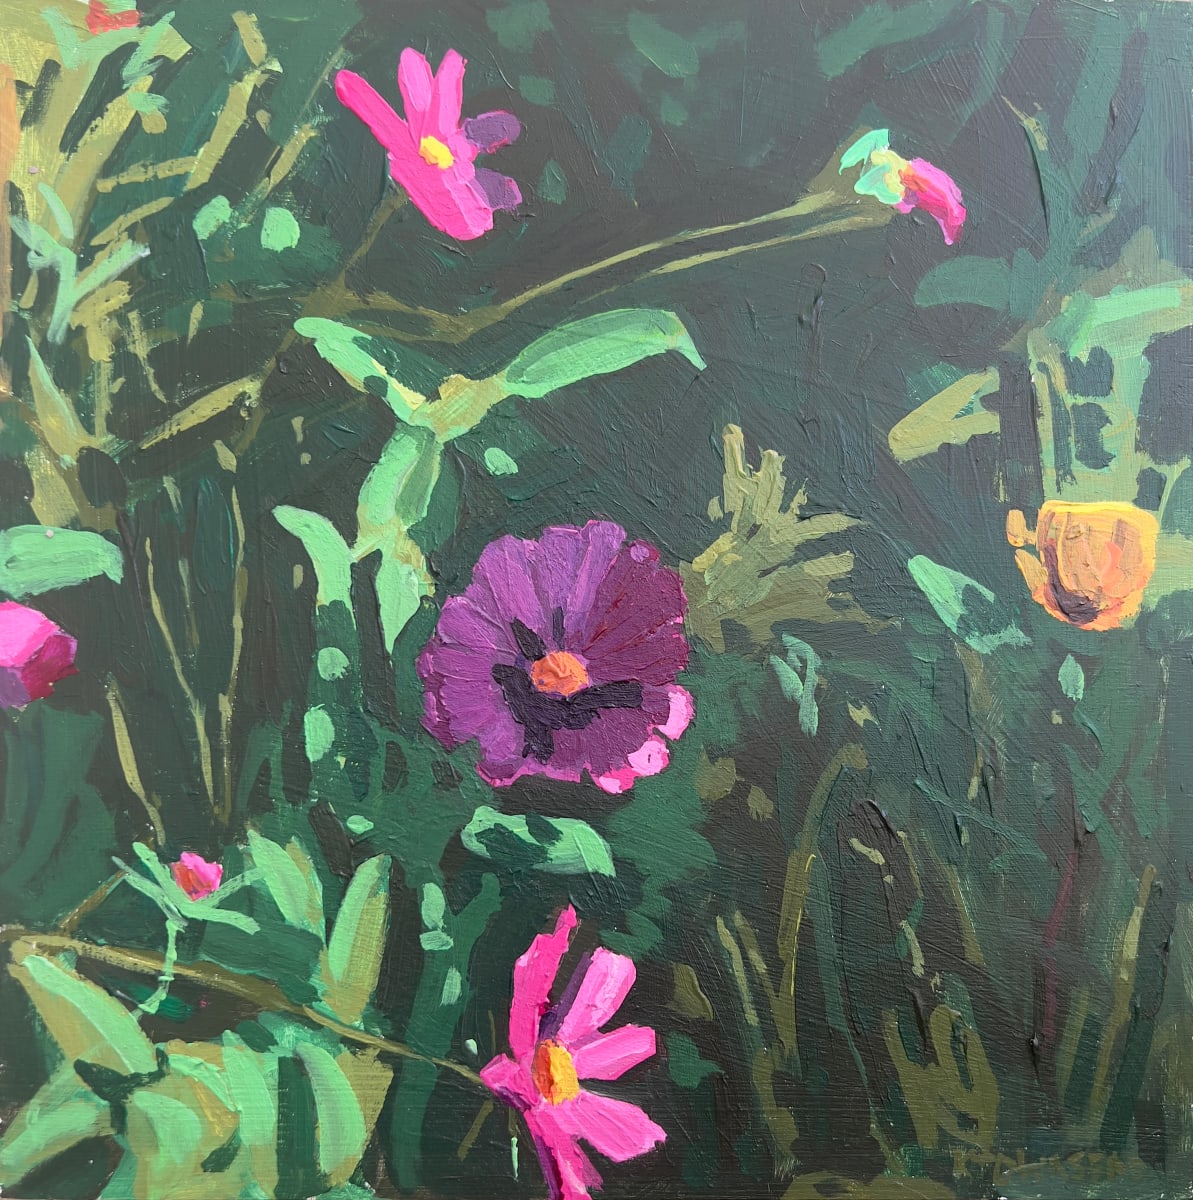 Flowers in Shade by Krista Townsend 